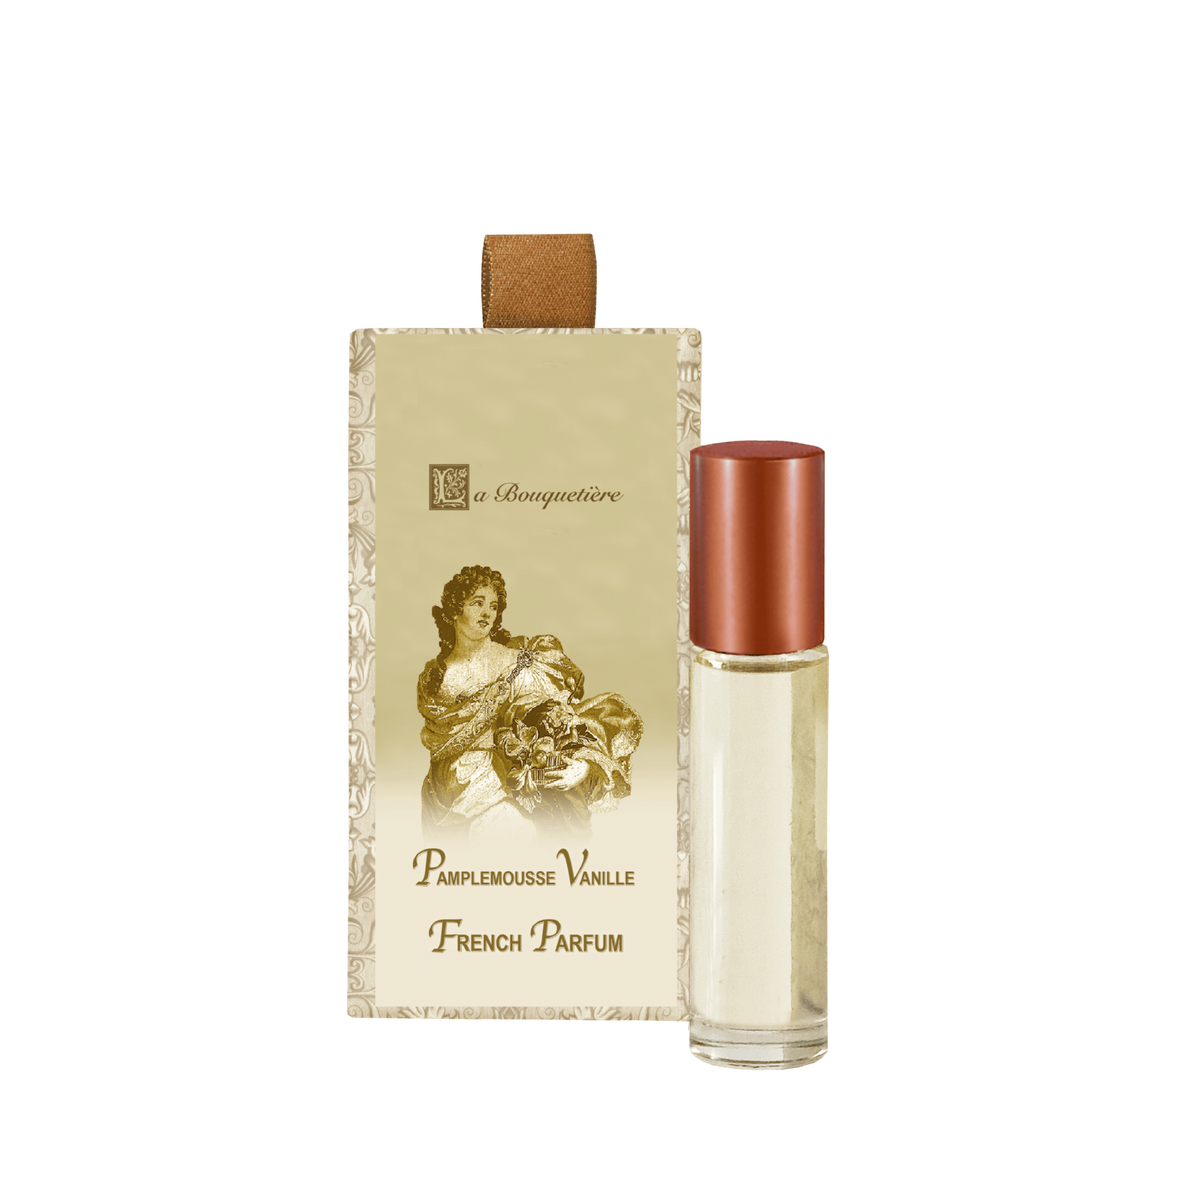 A bottle of La Bouquetiere Pamplemousse Vanille French Perfume Roll On beside its elegant beige packaging adorned with a vintage illustration of a woman holding flowers, embodies a unisex fragrance.